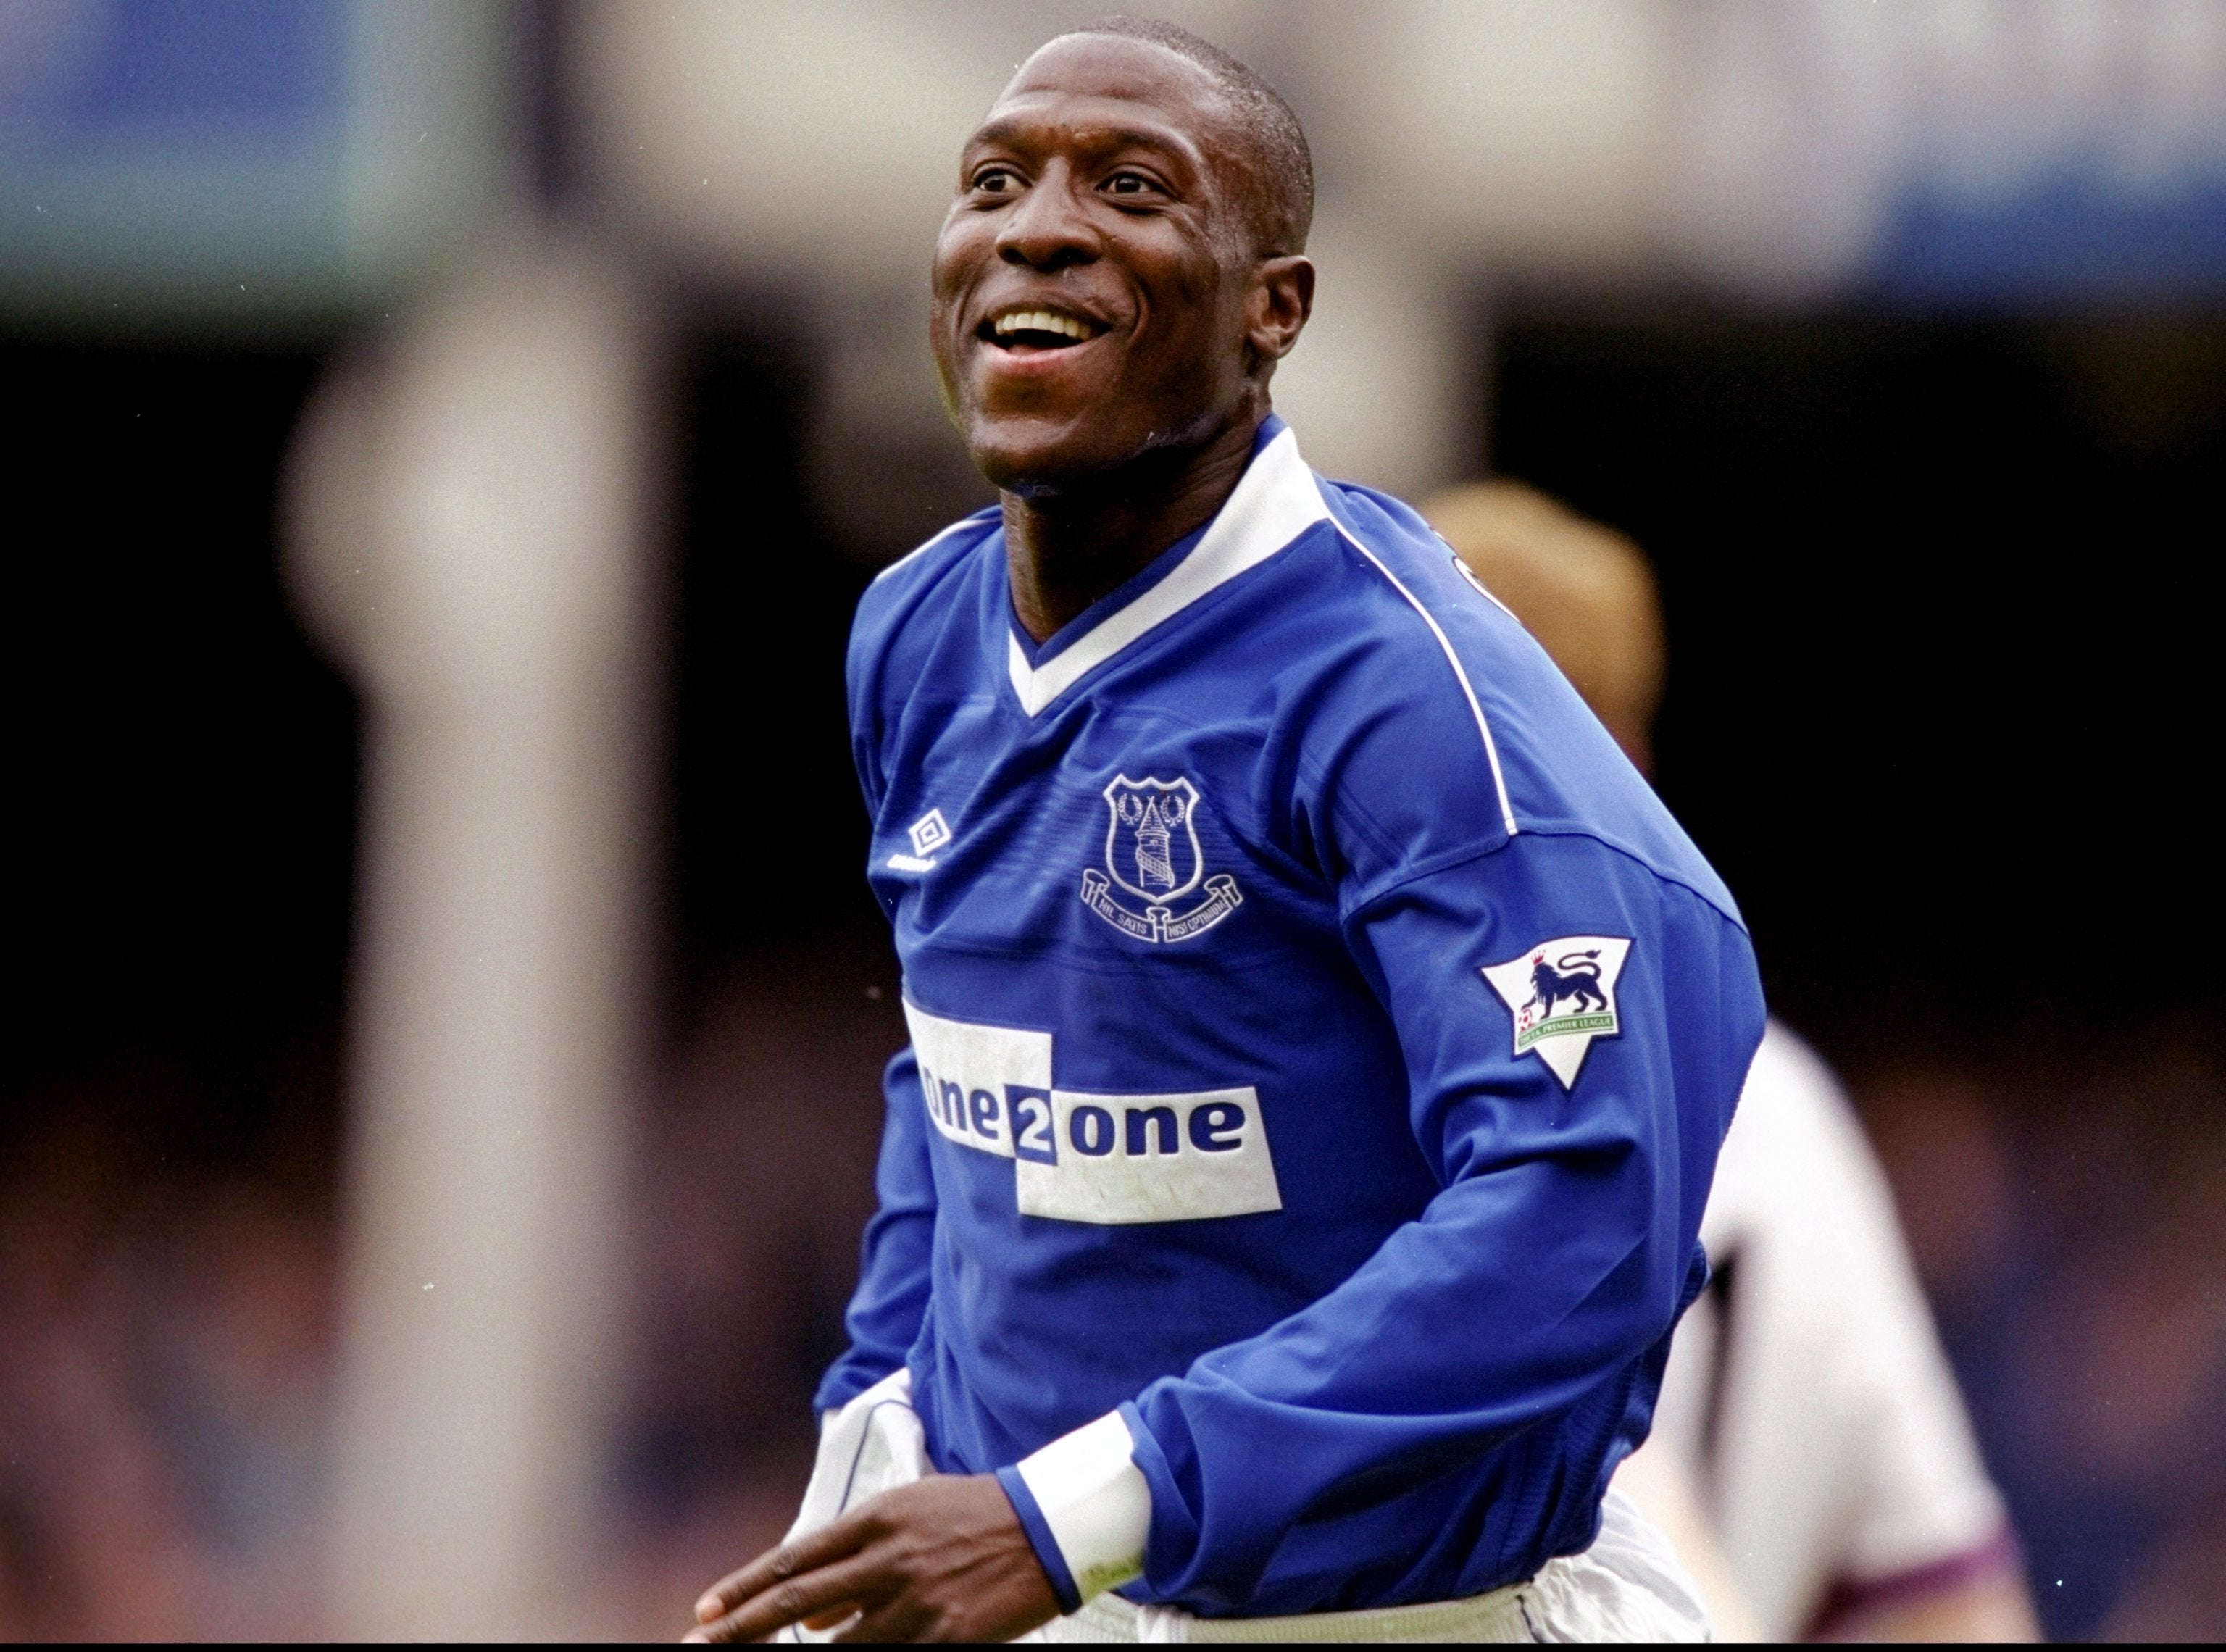 arsenal, ian wright, everton, former arsenal and everton striker kevin campbell dies, aged 54